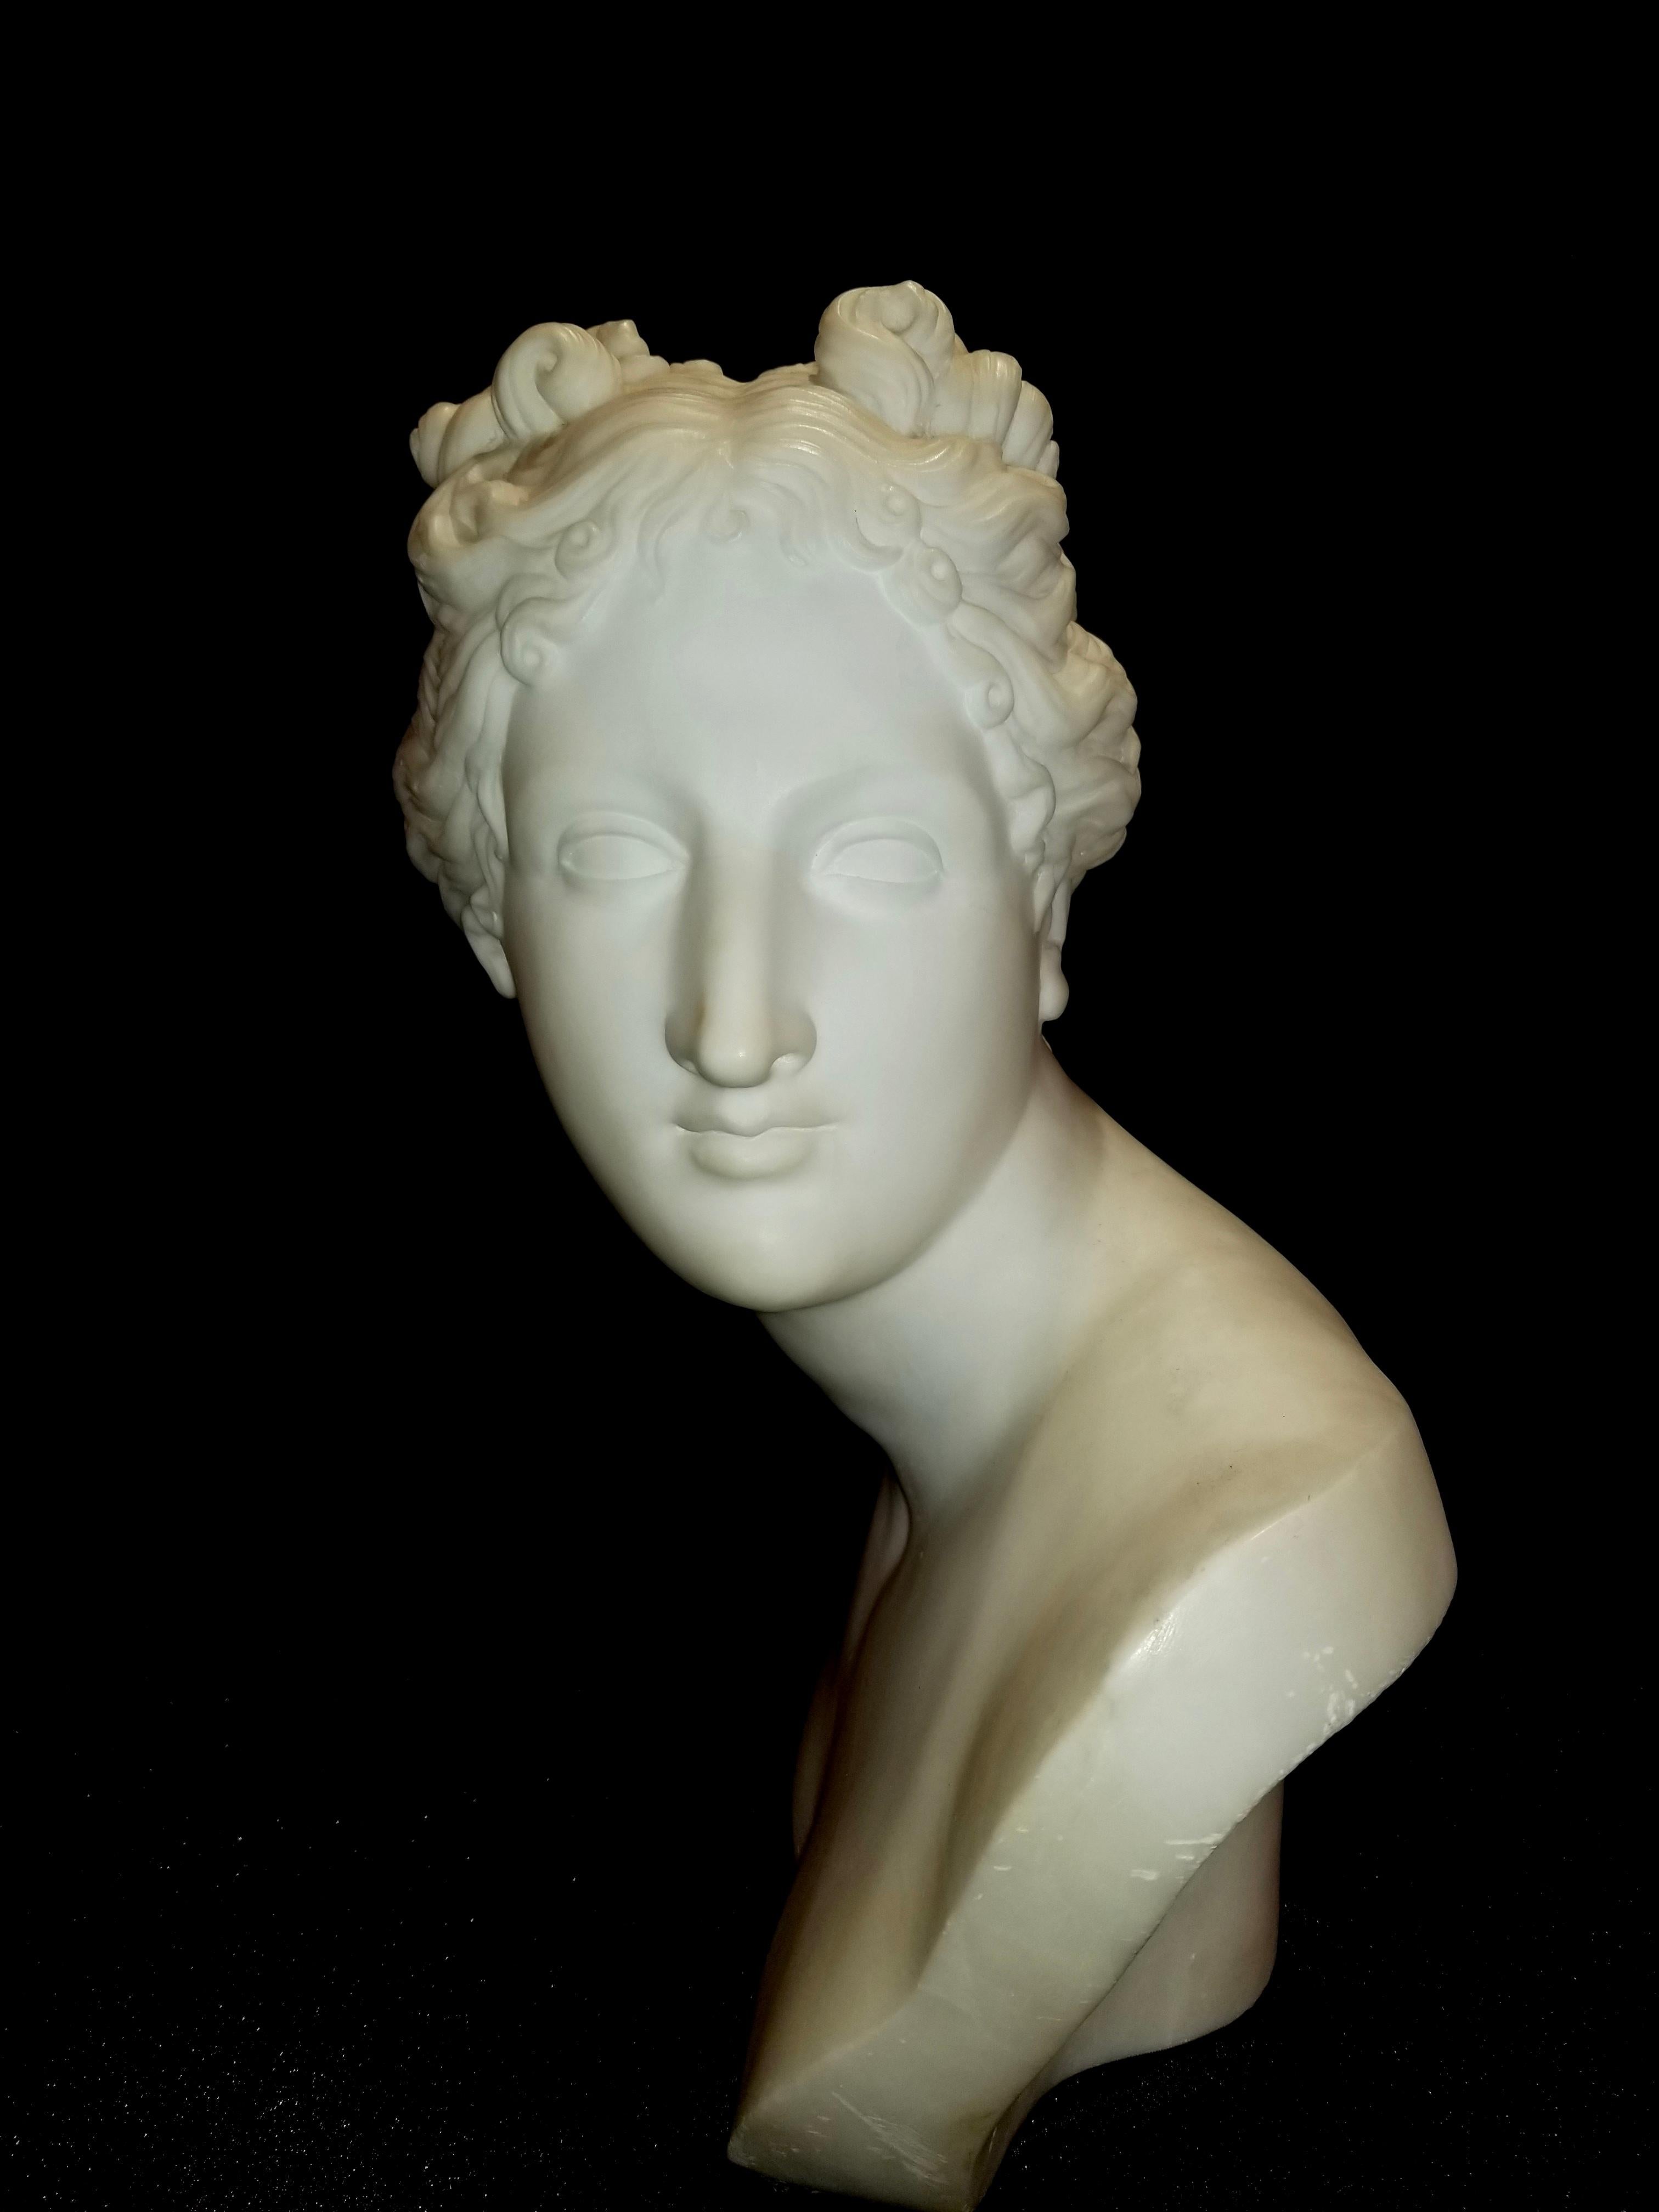 A beautiful neoclassical hand-chiseled marble bust of venus after Antonio Canova, Signed Pietro Bazzanti, Florence. This beautiful bust was originally made by Antonio Canova (1757-1822). An intricate amount of detail was placed in hand-chiseling the